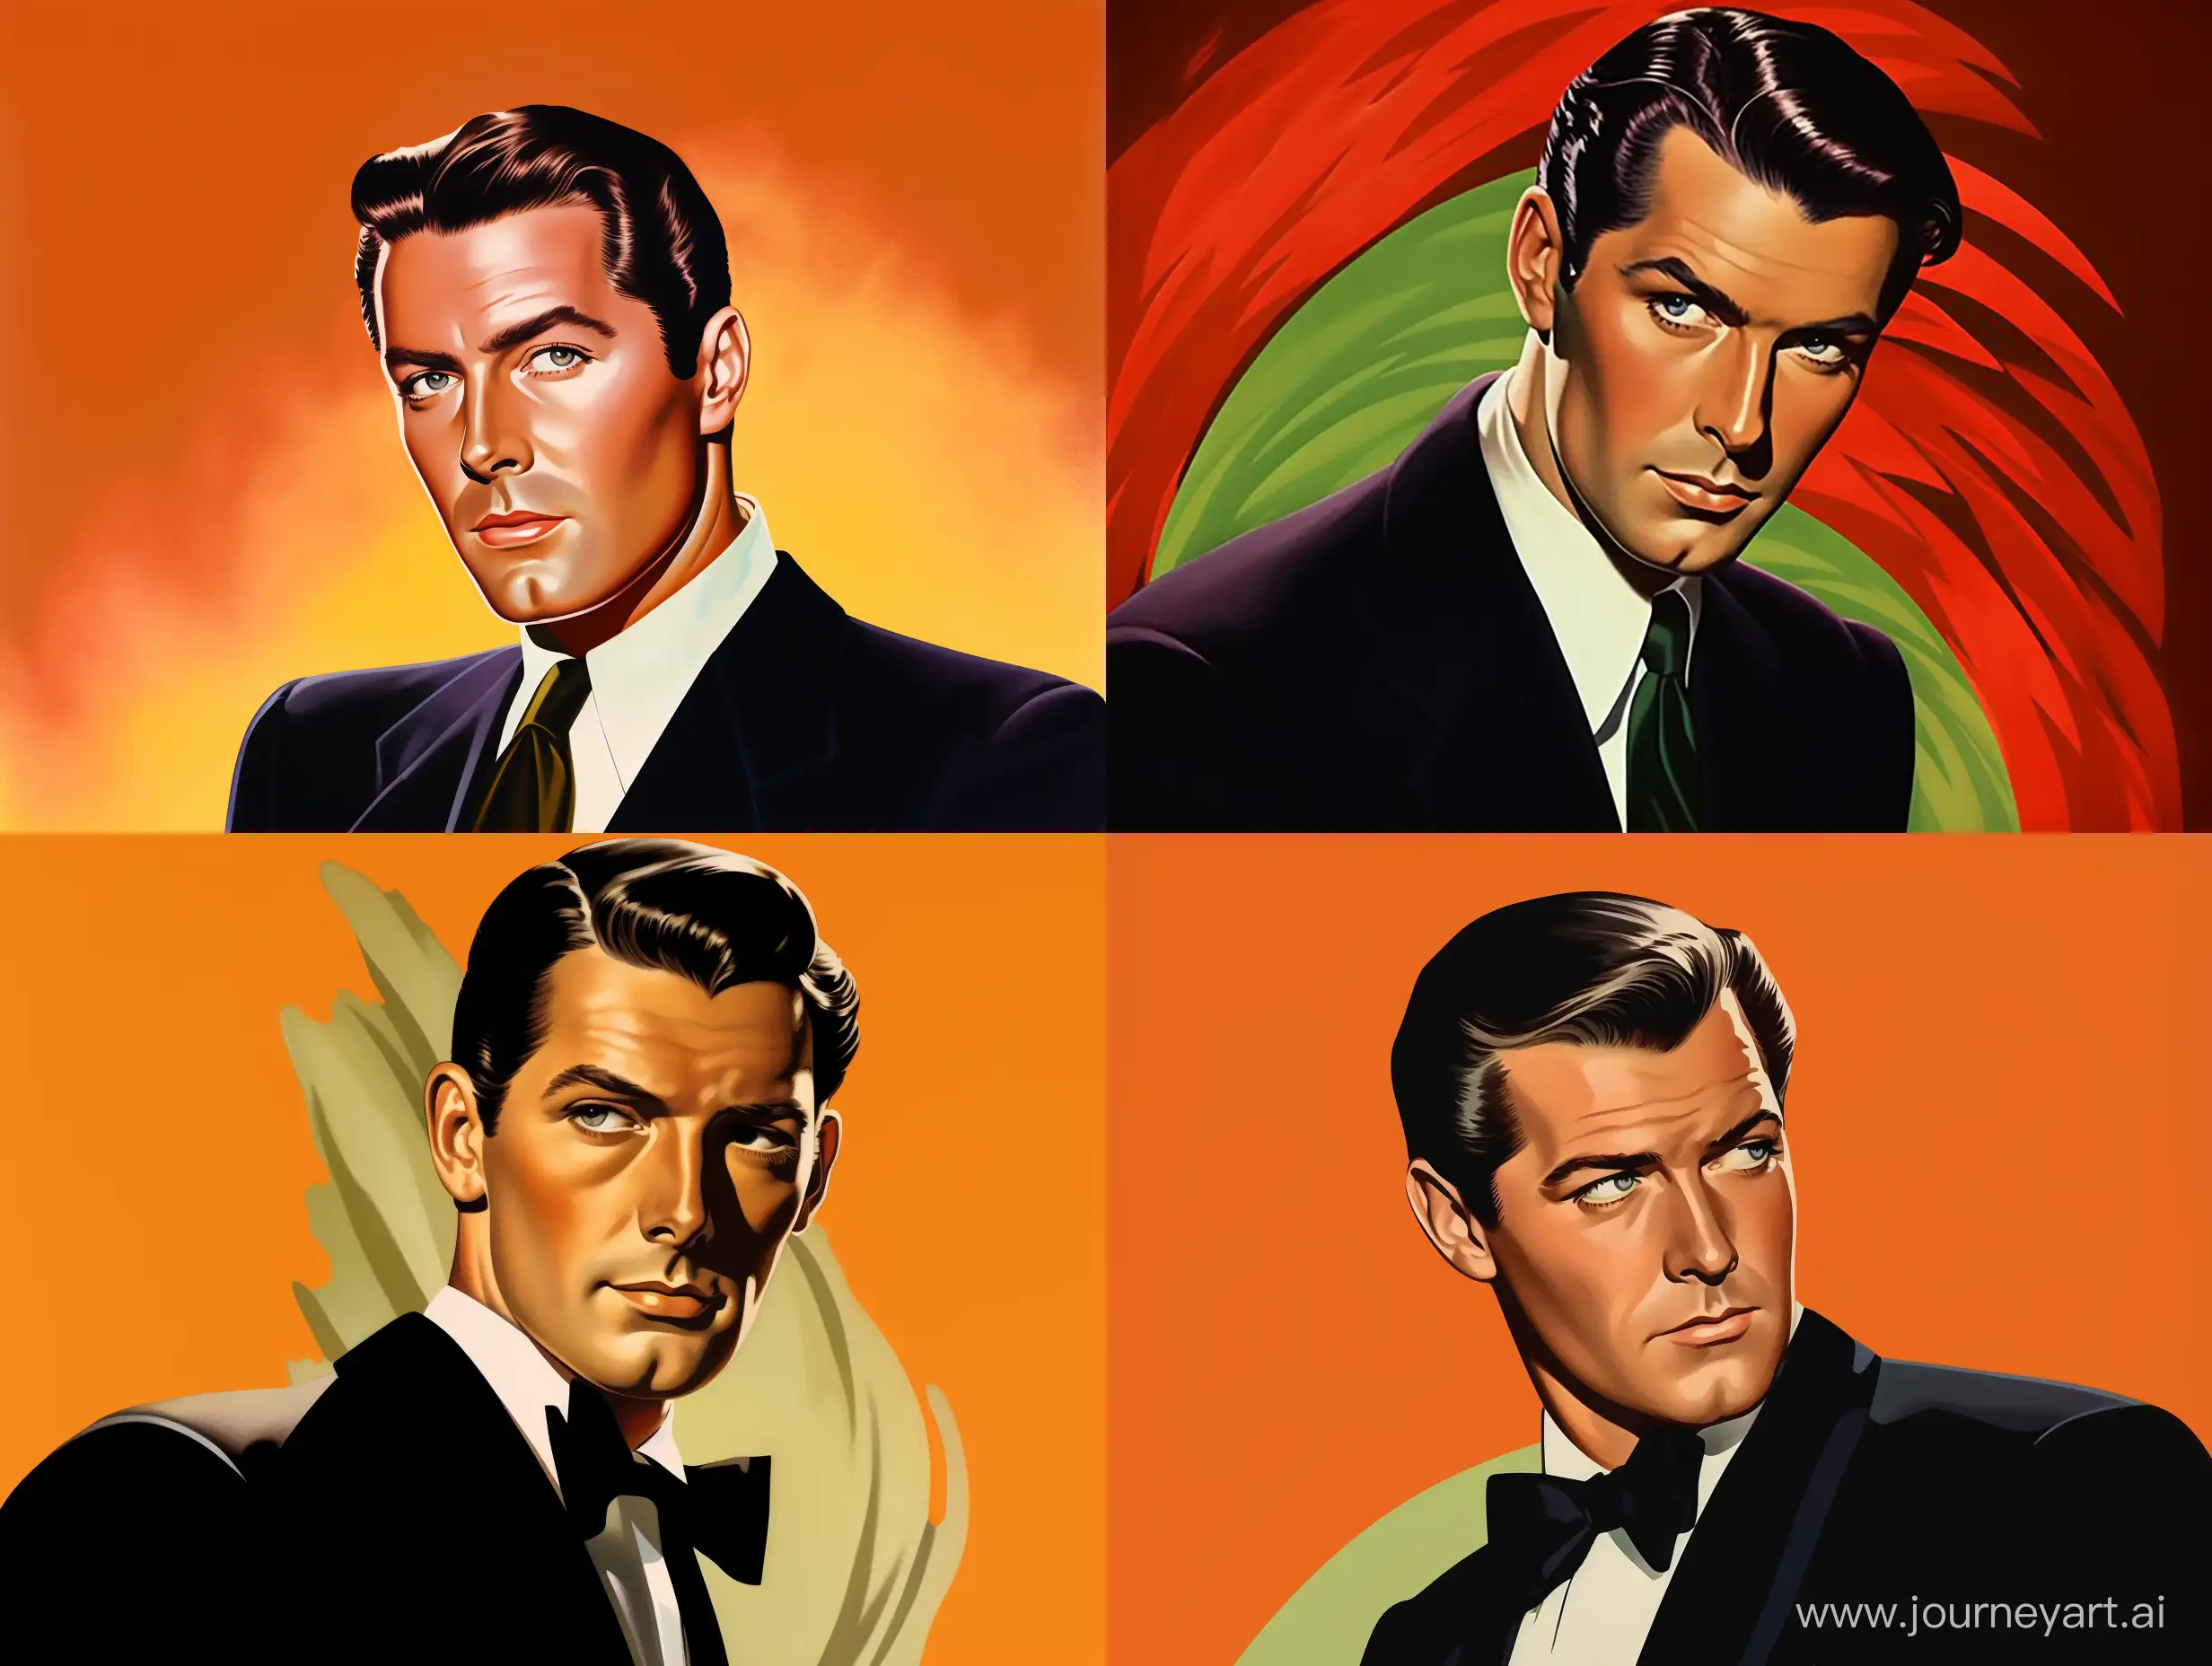 Robert Maguire style Pulp art of glamorous 1940s handsome movie star man with slicked-back hair wearing a sharp suit, solid color background  --ar 4:3